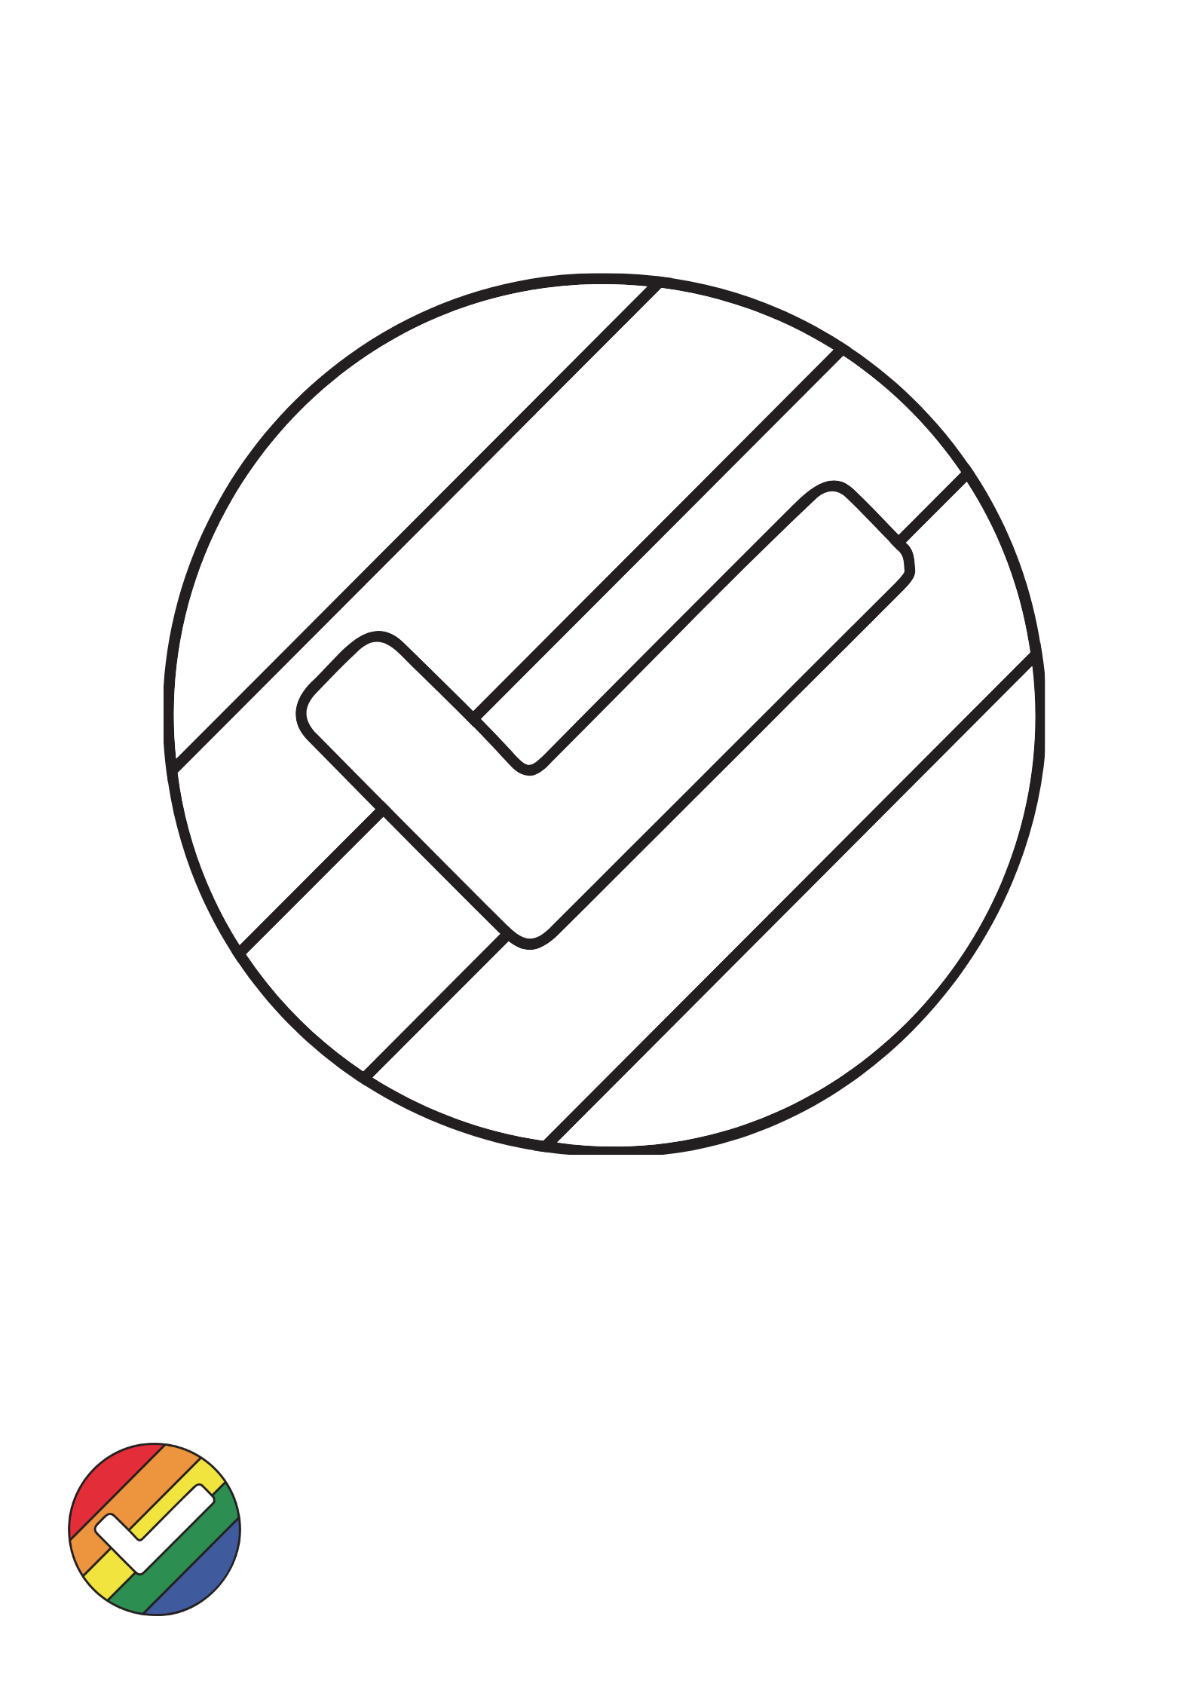 Rainbow Check Mark coloring page Template